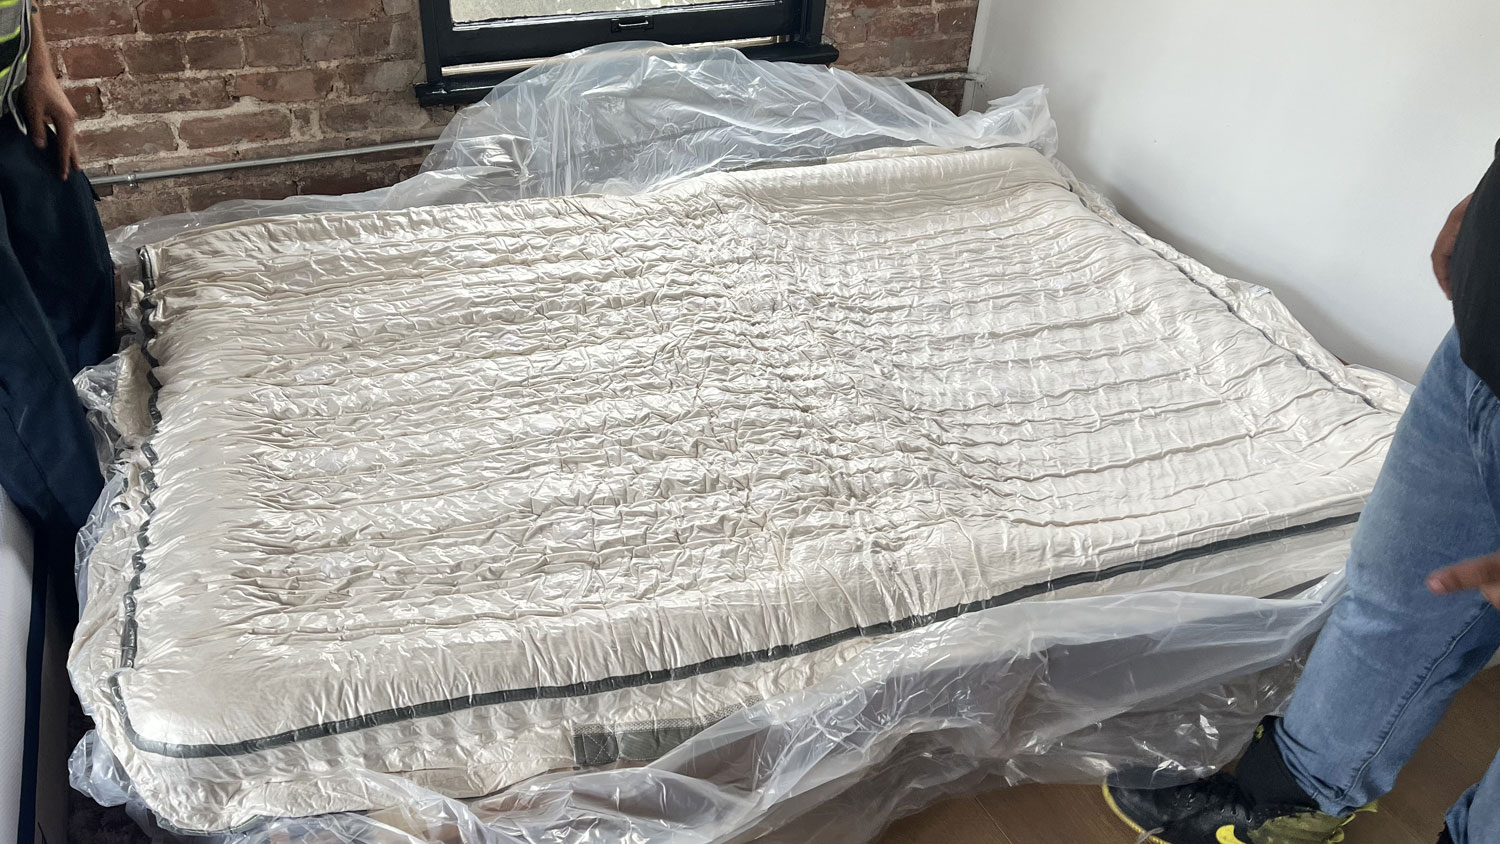 The Avocado Green mattress in its plastic wrapping on a bed